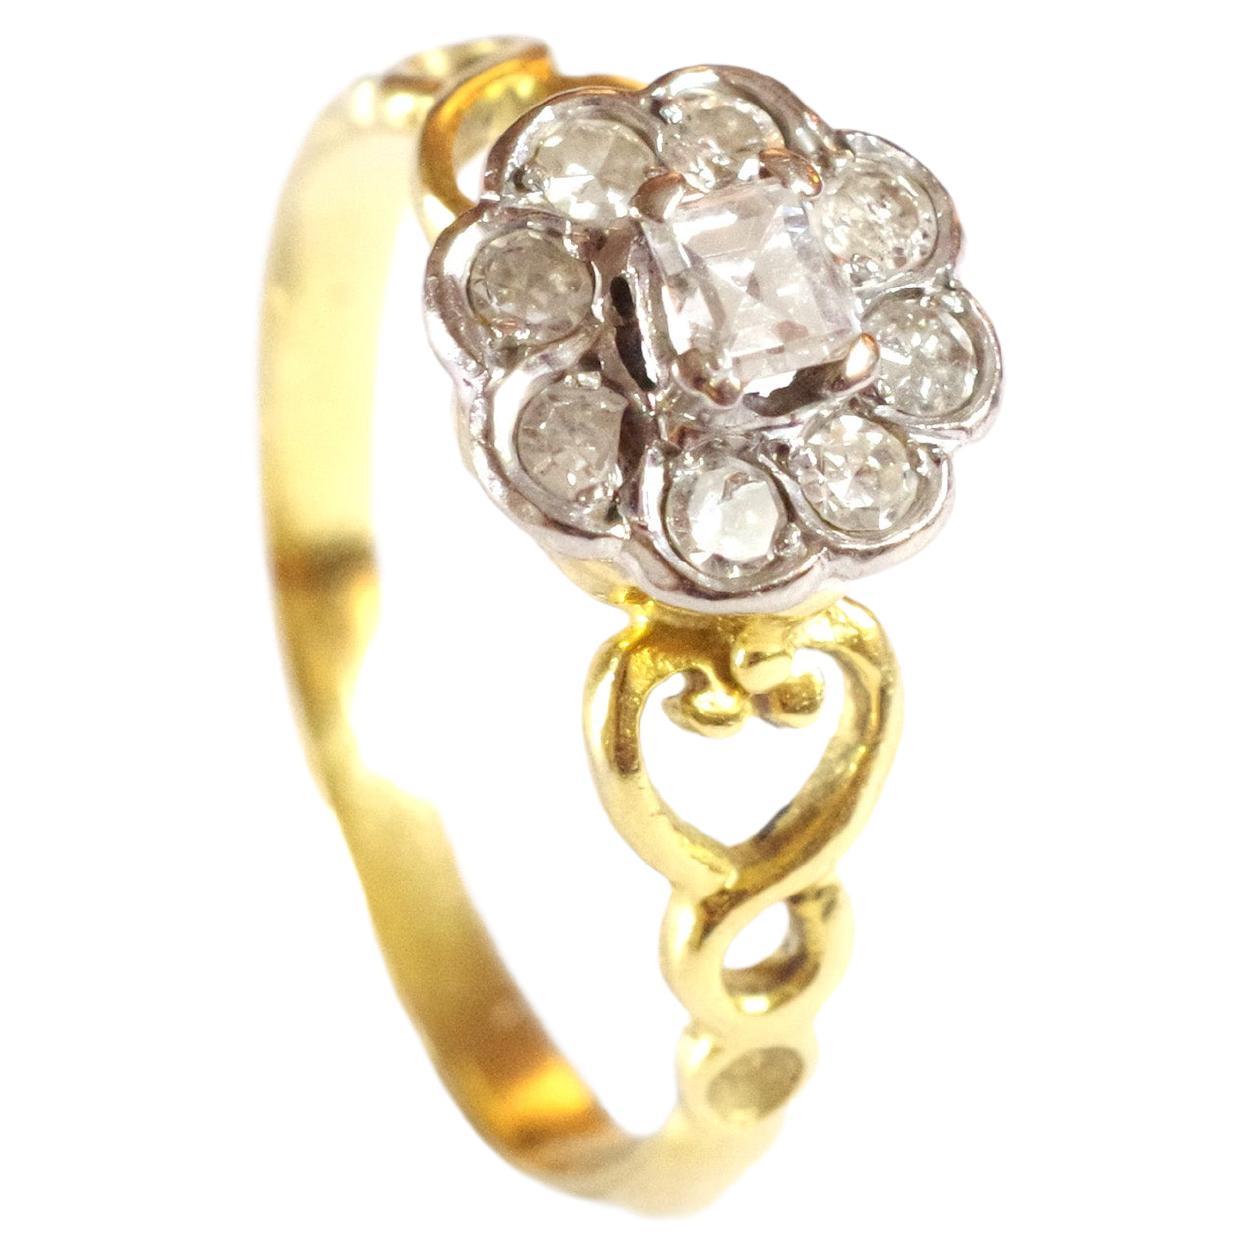 Diamond cluster flower ring in 18 karats white and yellow gold. A central fantasy cut diamond of rectangular shape is surrounded by eight old single cut and brilliant cut diamonds in a white gold setting. The ring takes the shape of a flower. The